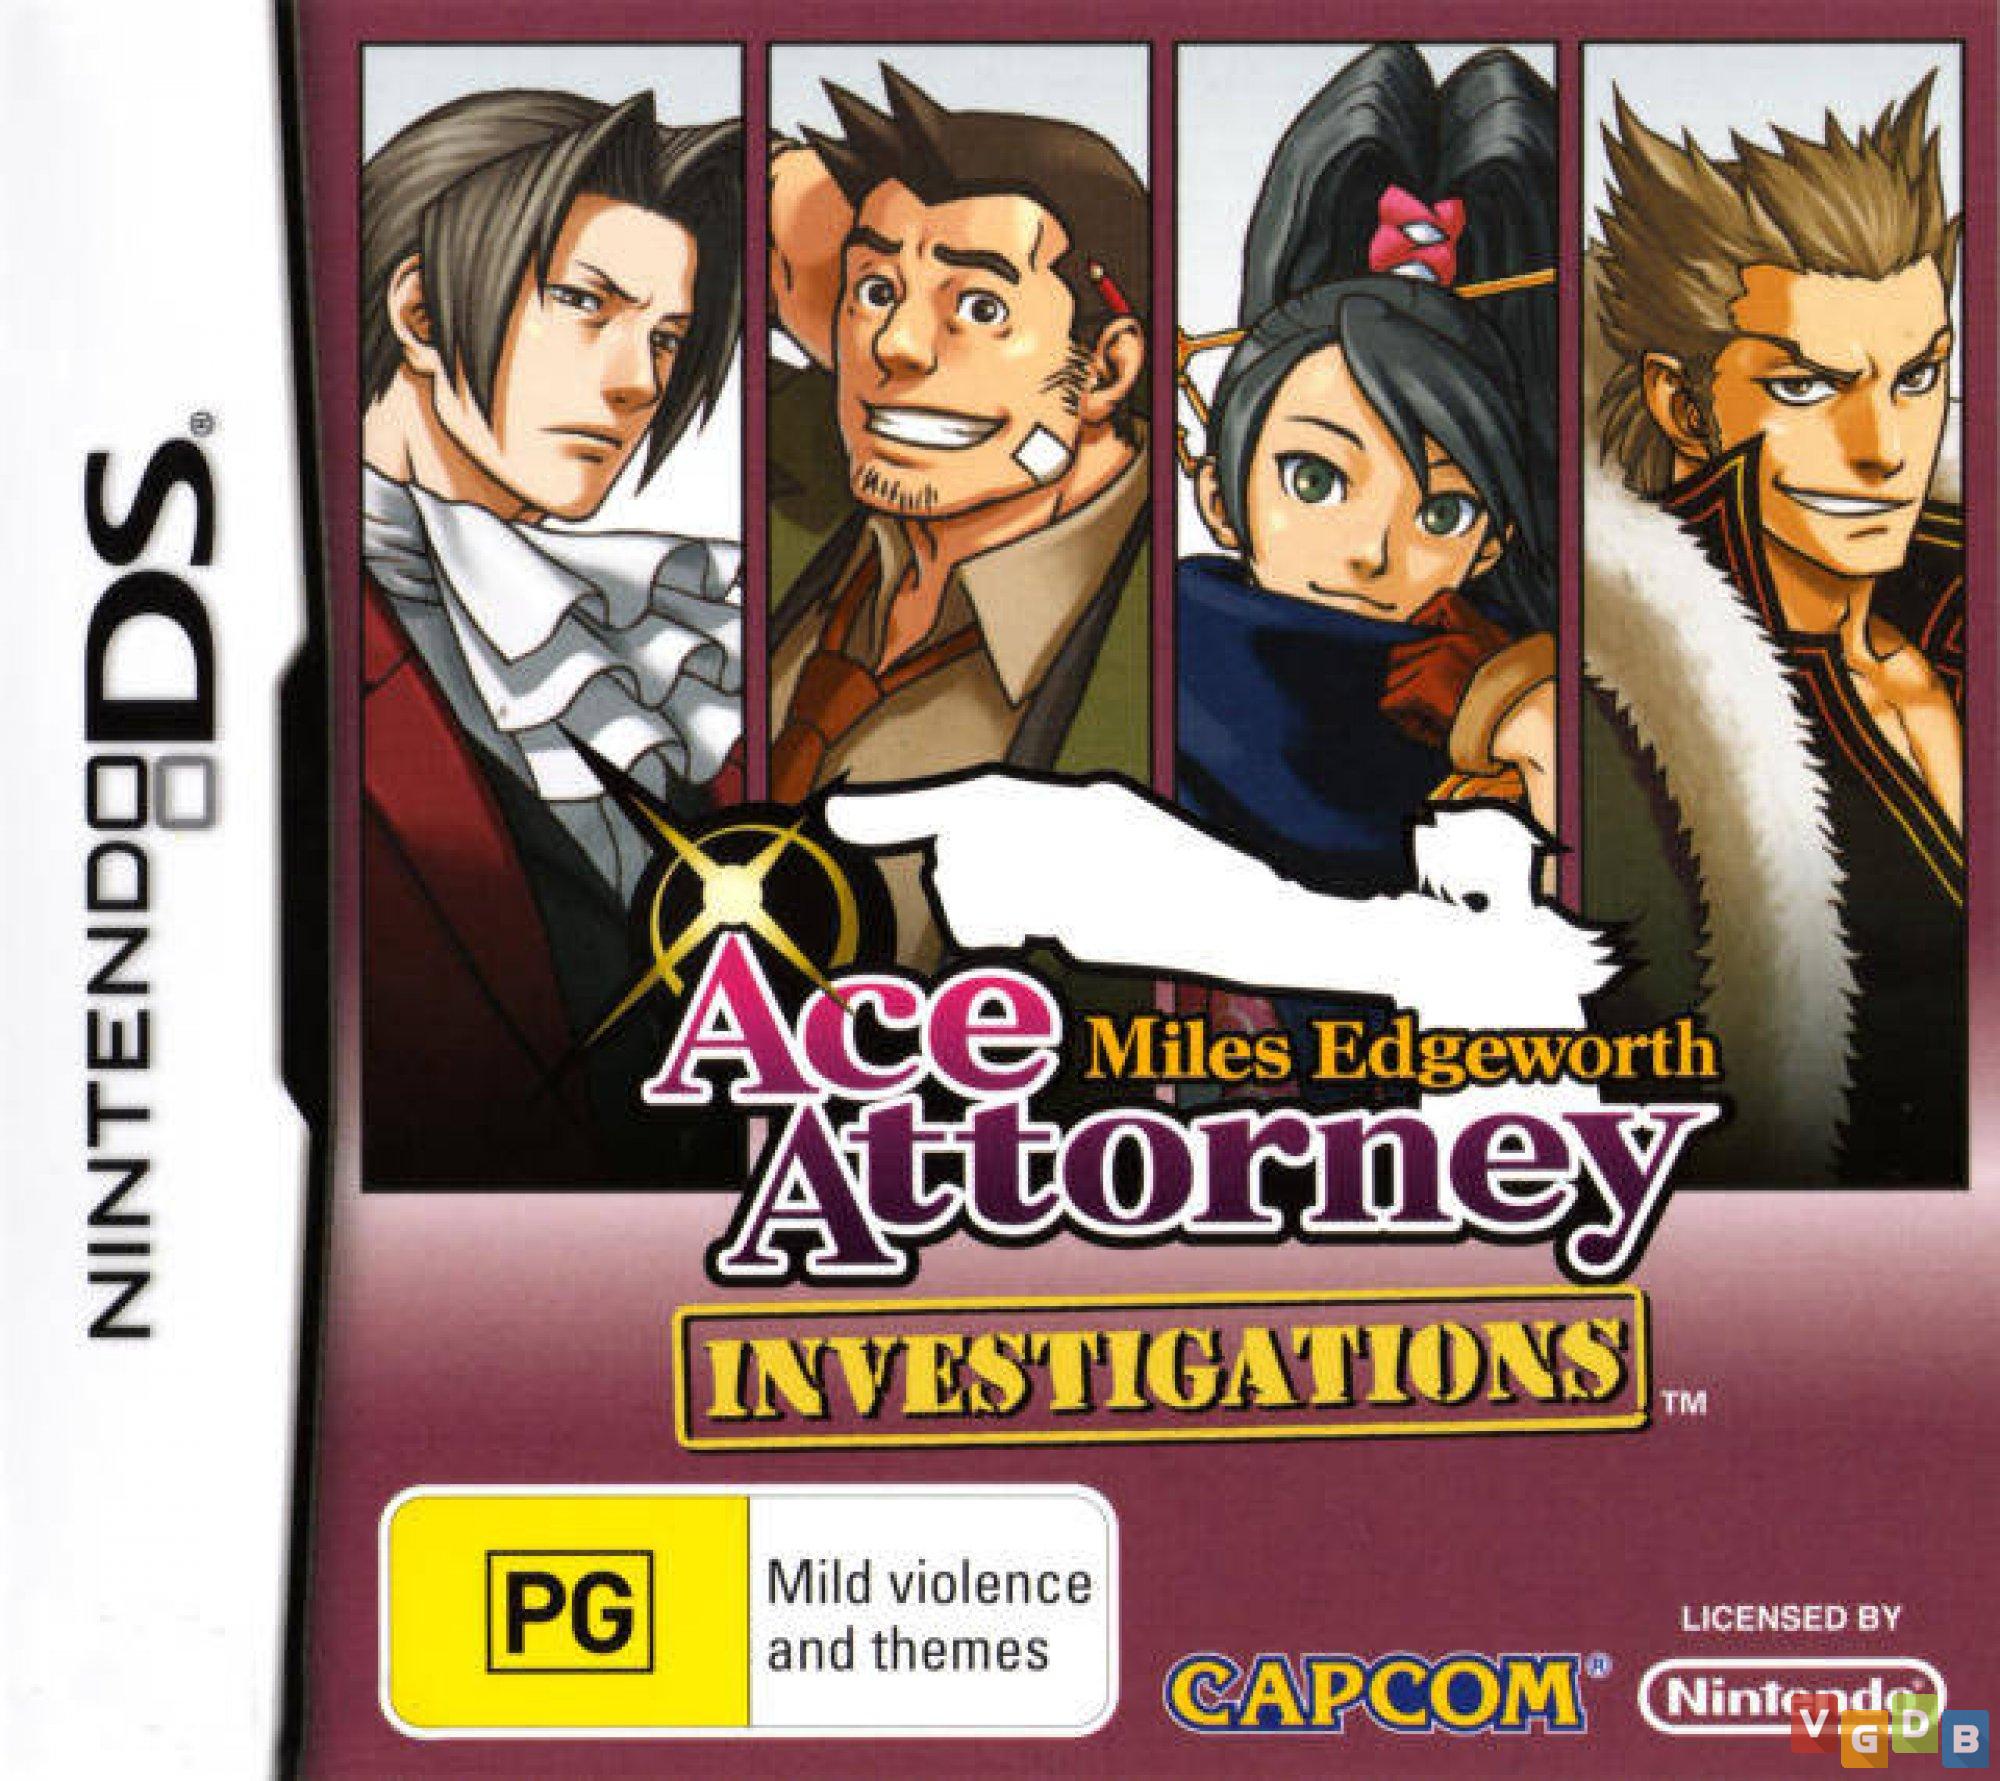 Miles investigation. Ace attorney investigations: Miles Edgeworth. Miles Edgeworth investigations 2. Ace attorney Nintendo DS. Ace attorney investigations 2 poster.